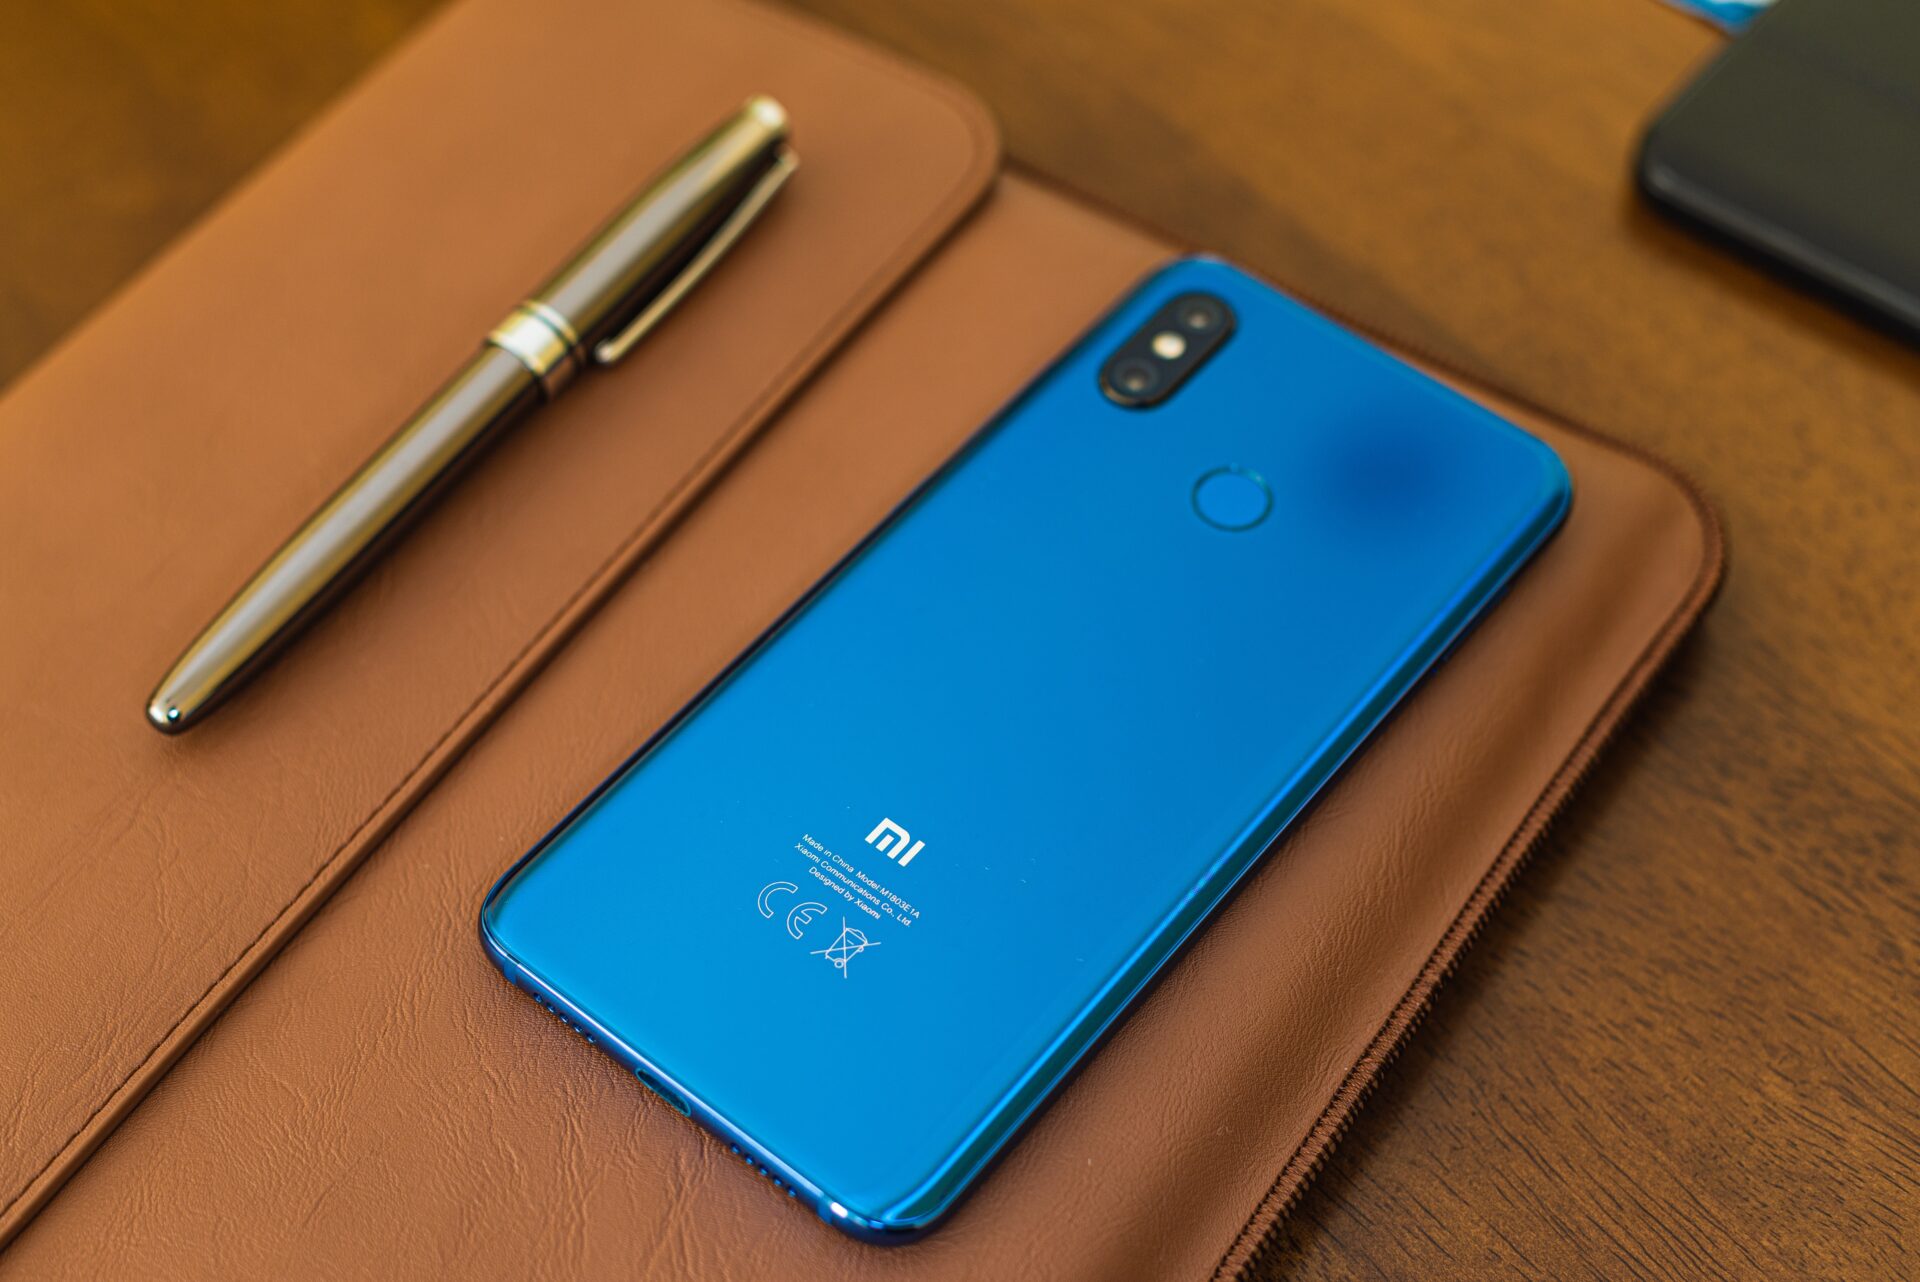 Why I Switched to Xiaomi: An Apple User's Perspective